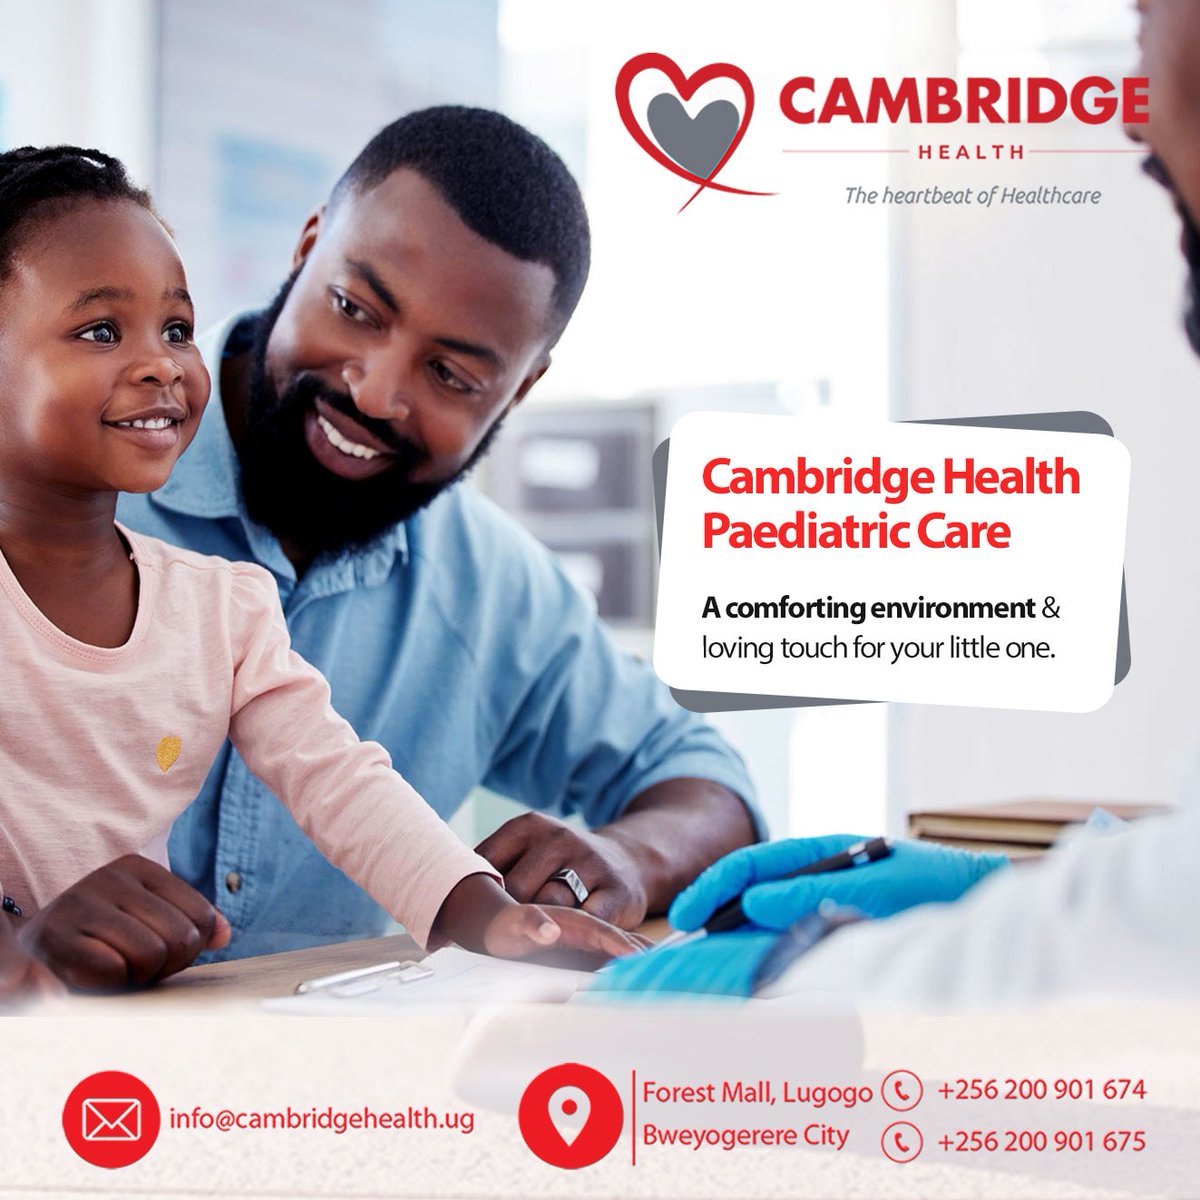 We offer Premium Paediatric Care that is suitable for your little one.

#CambridgeHealth #PaediatricCare #healthcare